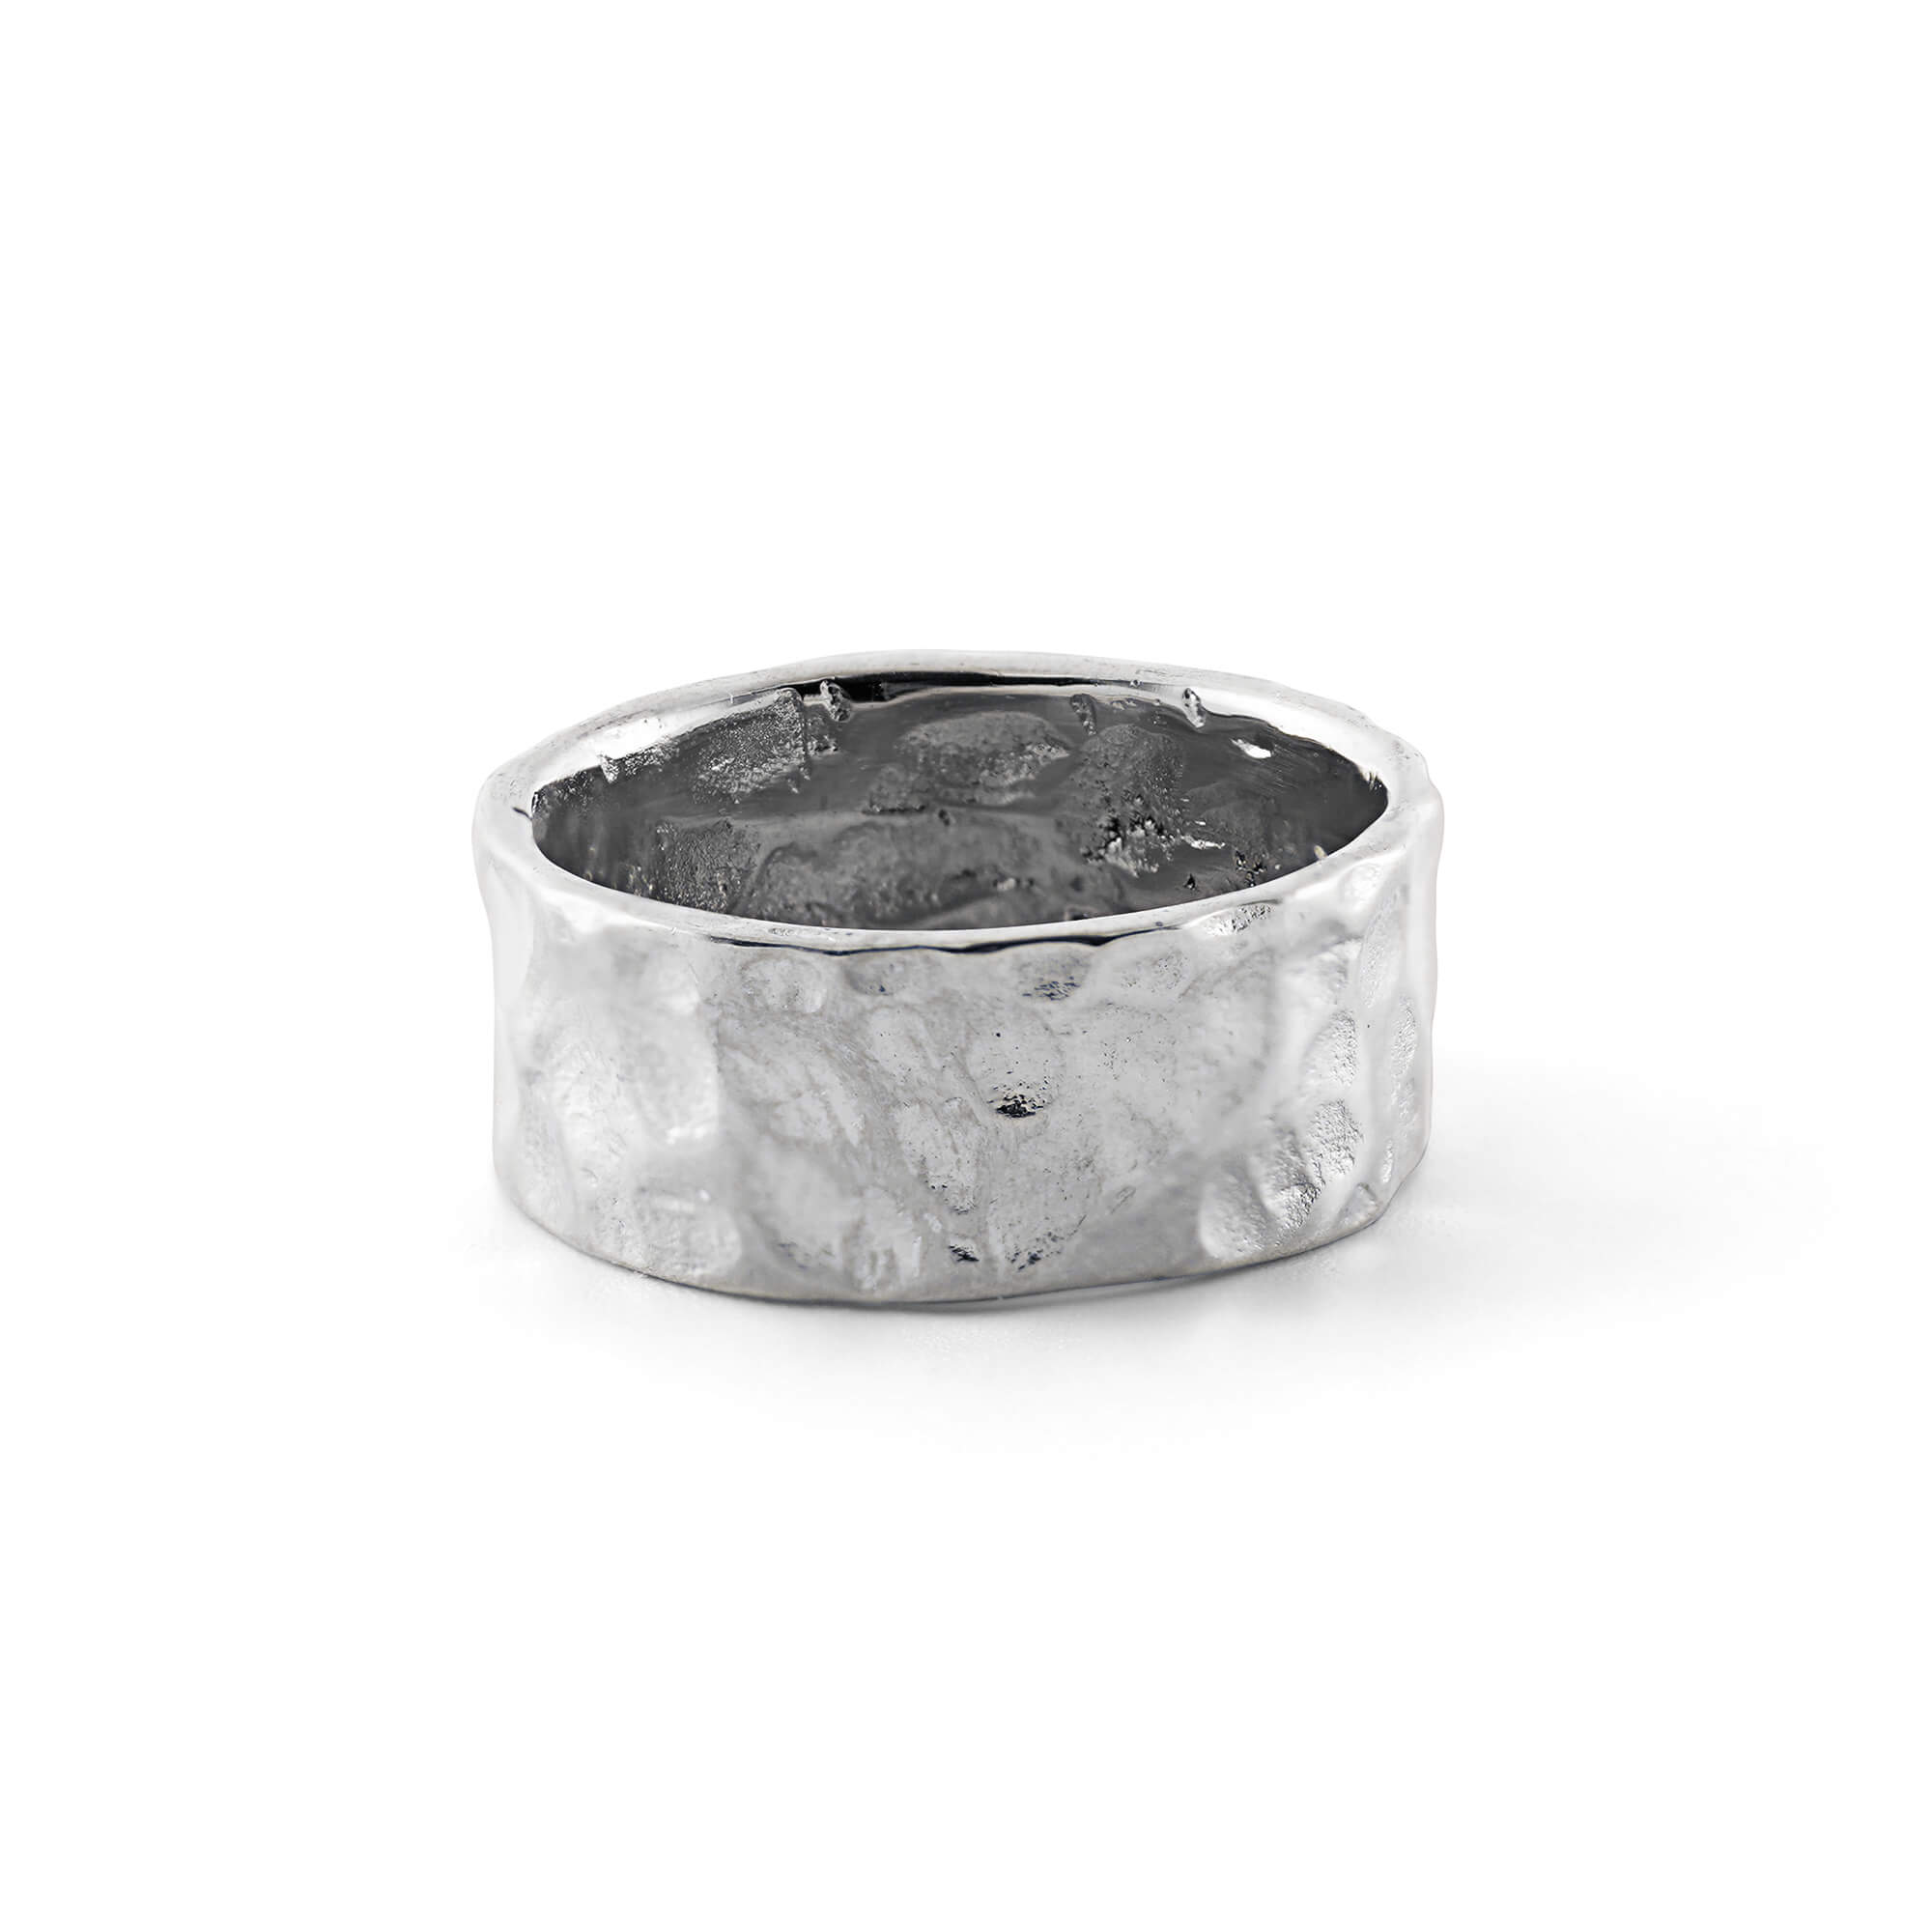 LUNE ring, designed in Montreal and made of waterproof and hypoallergenic stainless steel in silver color. Its unique design boasts delicate bumps, embodying a perfectly imperfect aesthetic inspired by the lunar landscape with its craters and golden reflections.